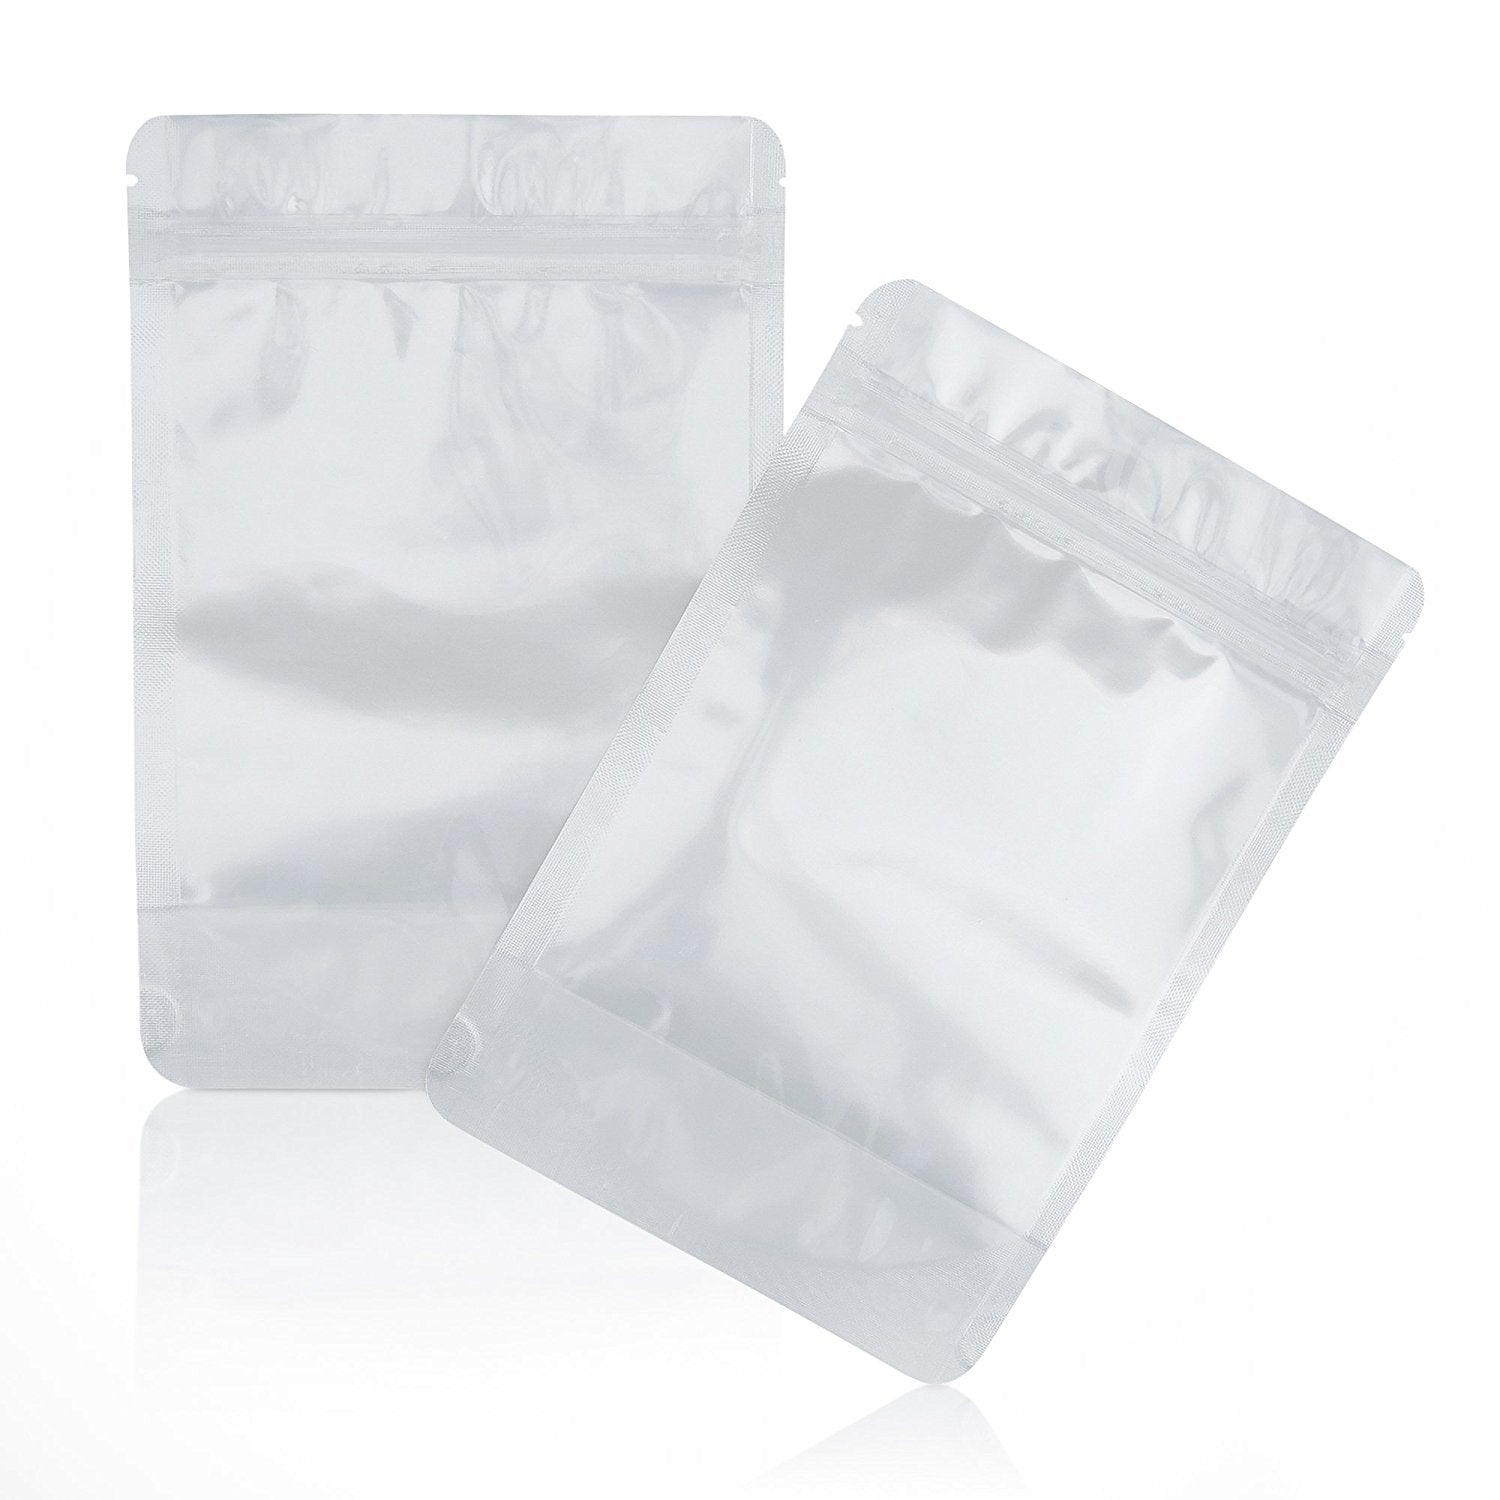 Mylar Bags with Ziplock 4 x 6 | 100 Bags | Sealable Heat Seal Bags for  Candy and Food Packaging, Medications and Vitamins | Plastic and Aluminum